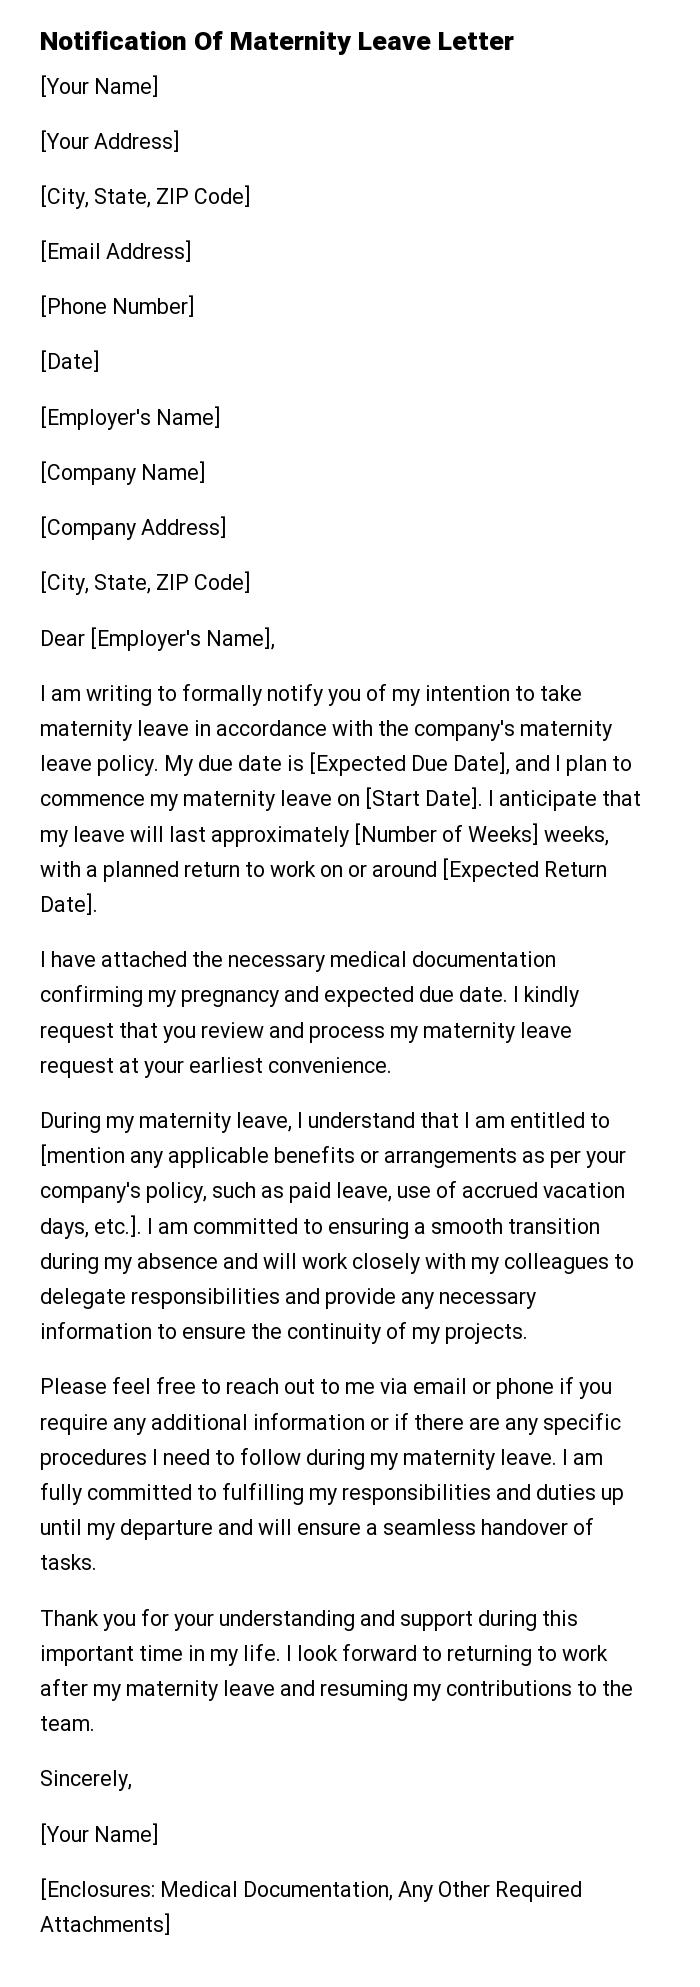 Notification Of Maternity Leave Letter